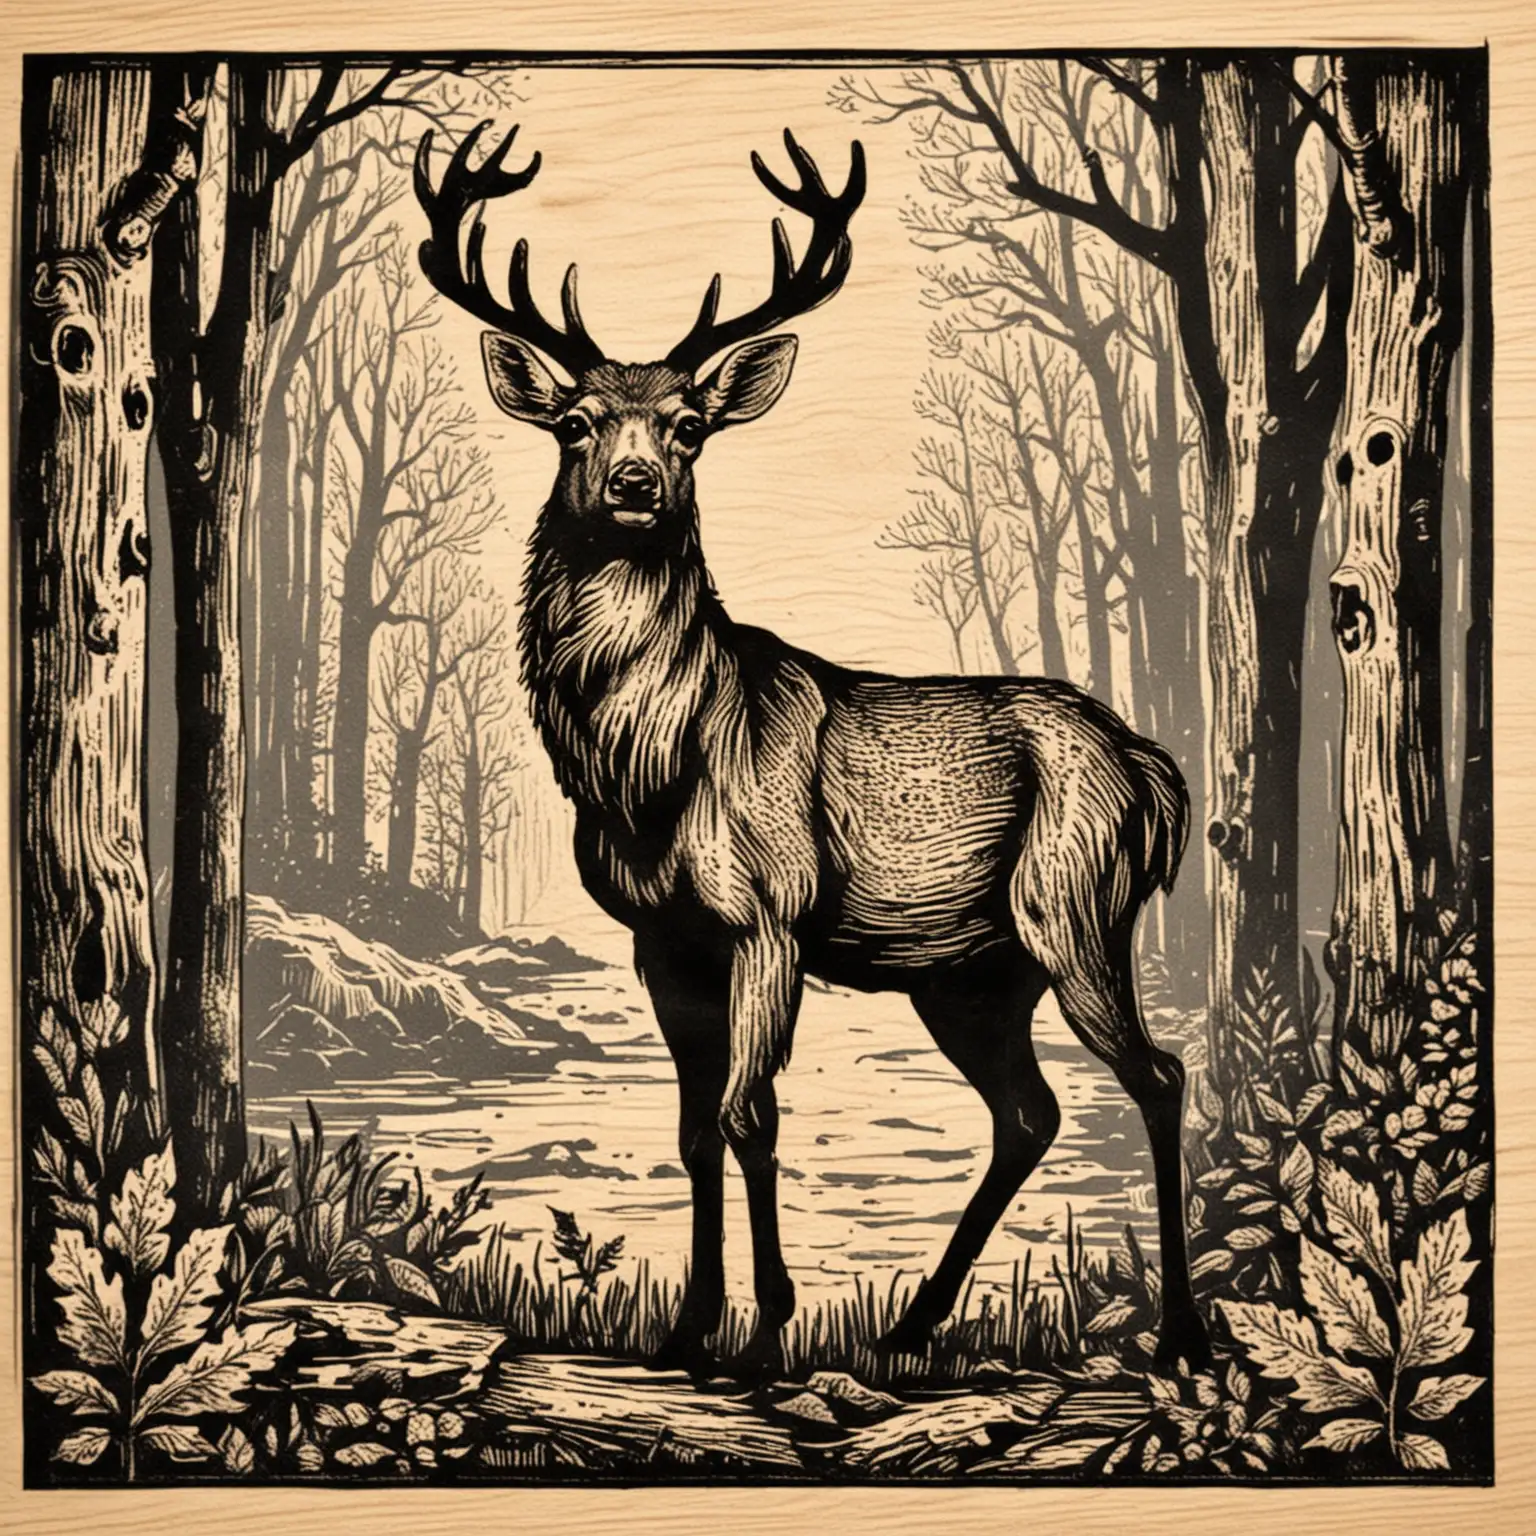 Majestic Woodcut Deer in Tranquil Forest Setting